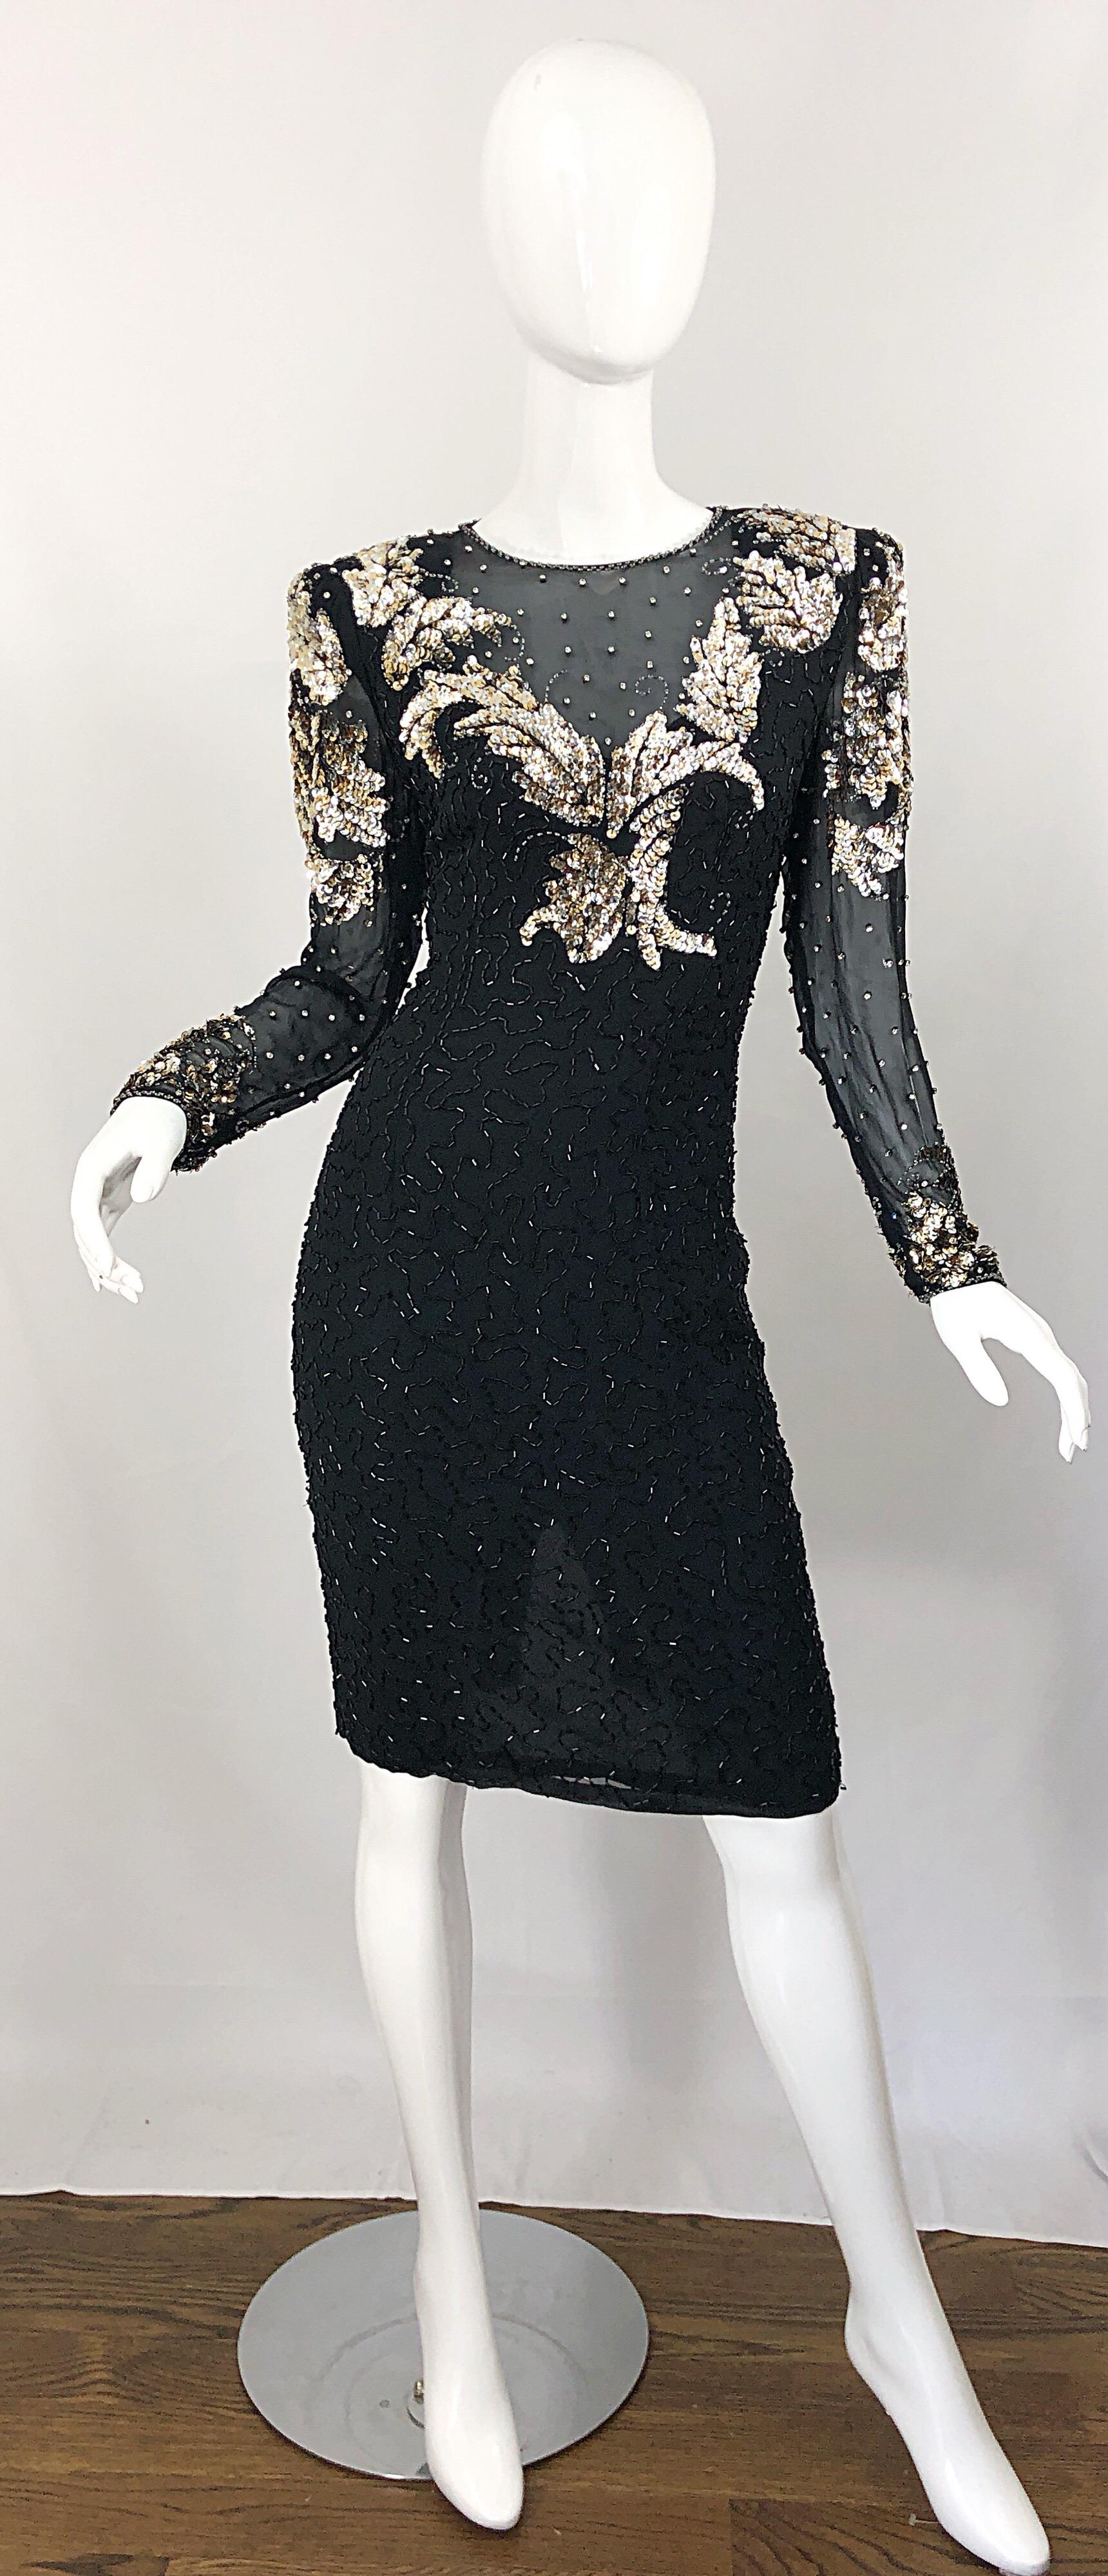 Gorgeous 1990s vintage black silk chiffon beaded cocktail dress! Features layers of luxurious black silk chiffon, with thousands of hand-sewn sequins, beads and rhinestones throughout. Peek-a-boo open back reveals just the right amount of skin.